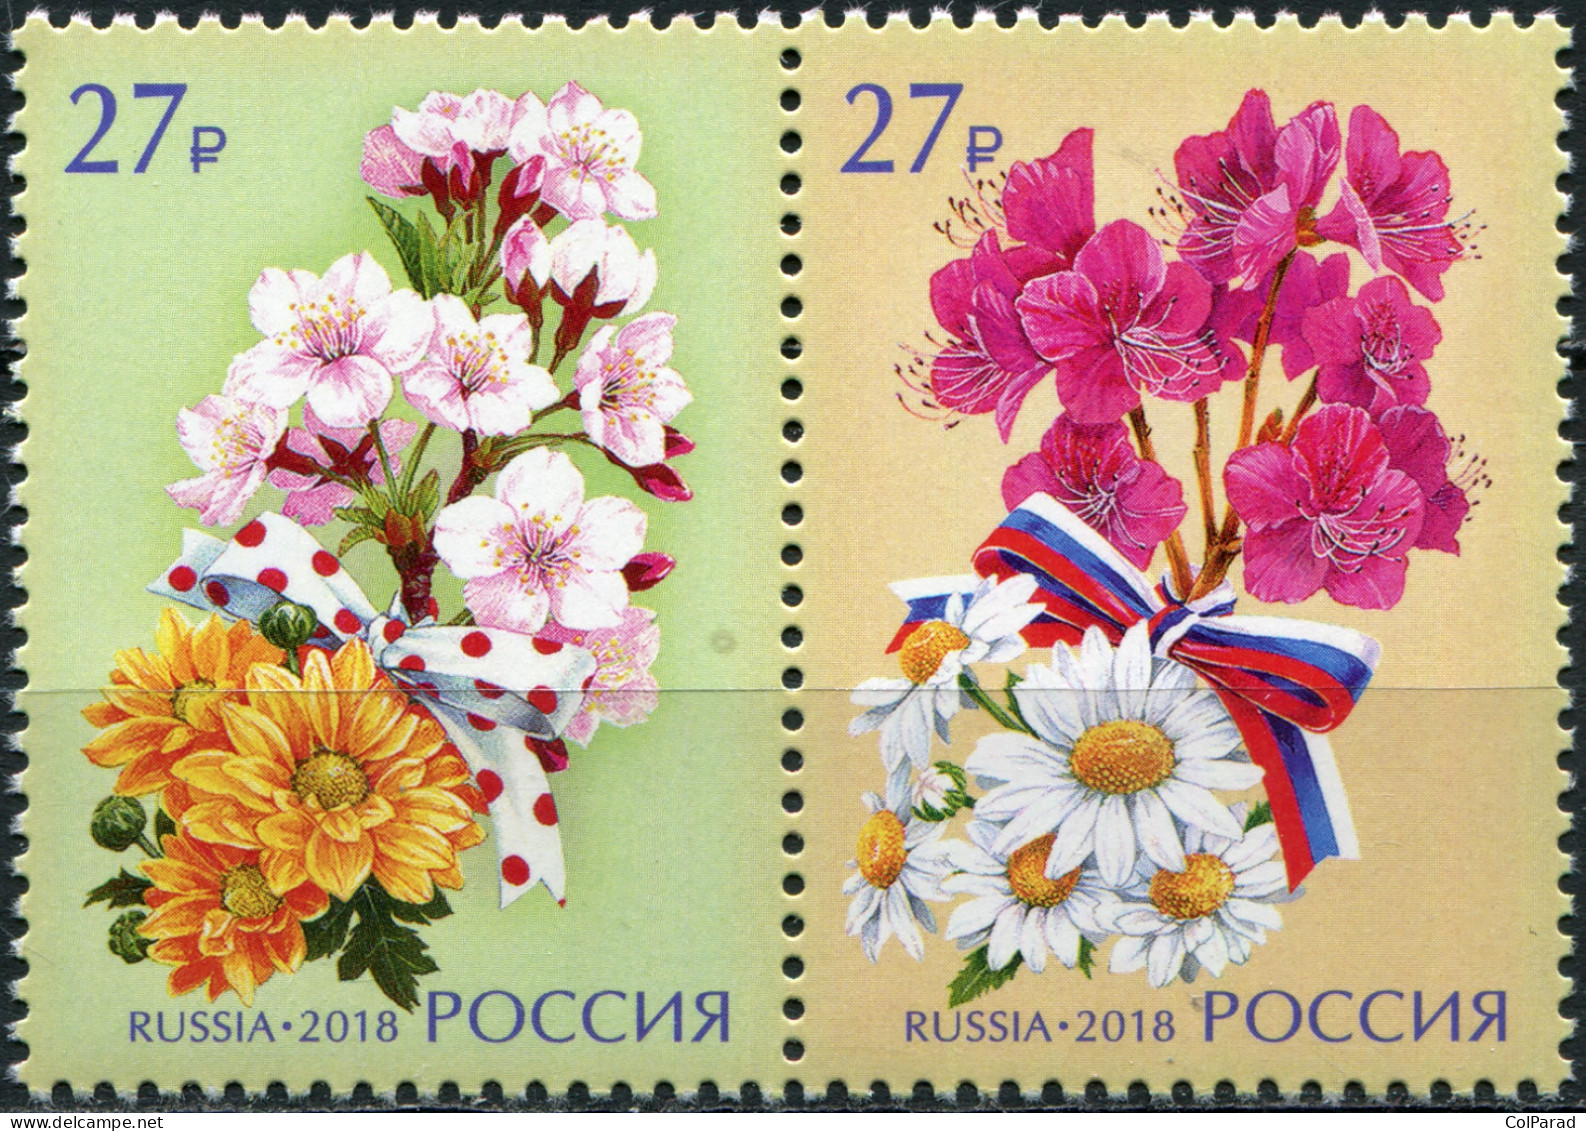 RUSSIA - 2018 - BLOCK OF 2 STAMPS MNH ** - Flowers - Unused Stamps